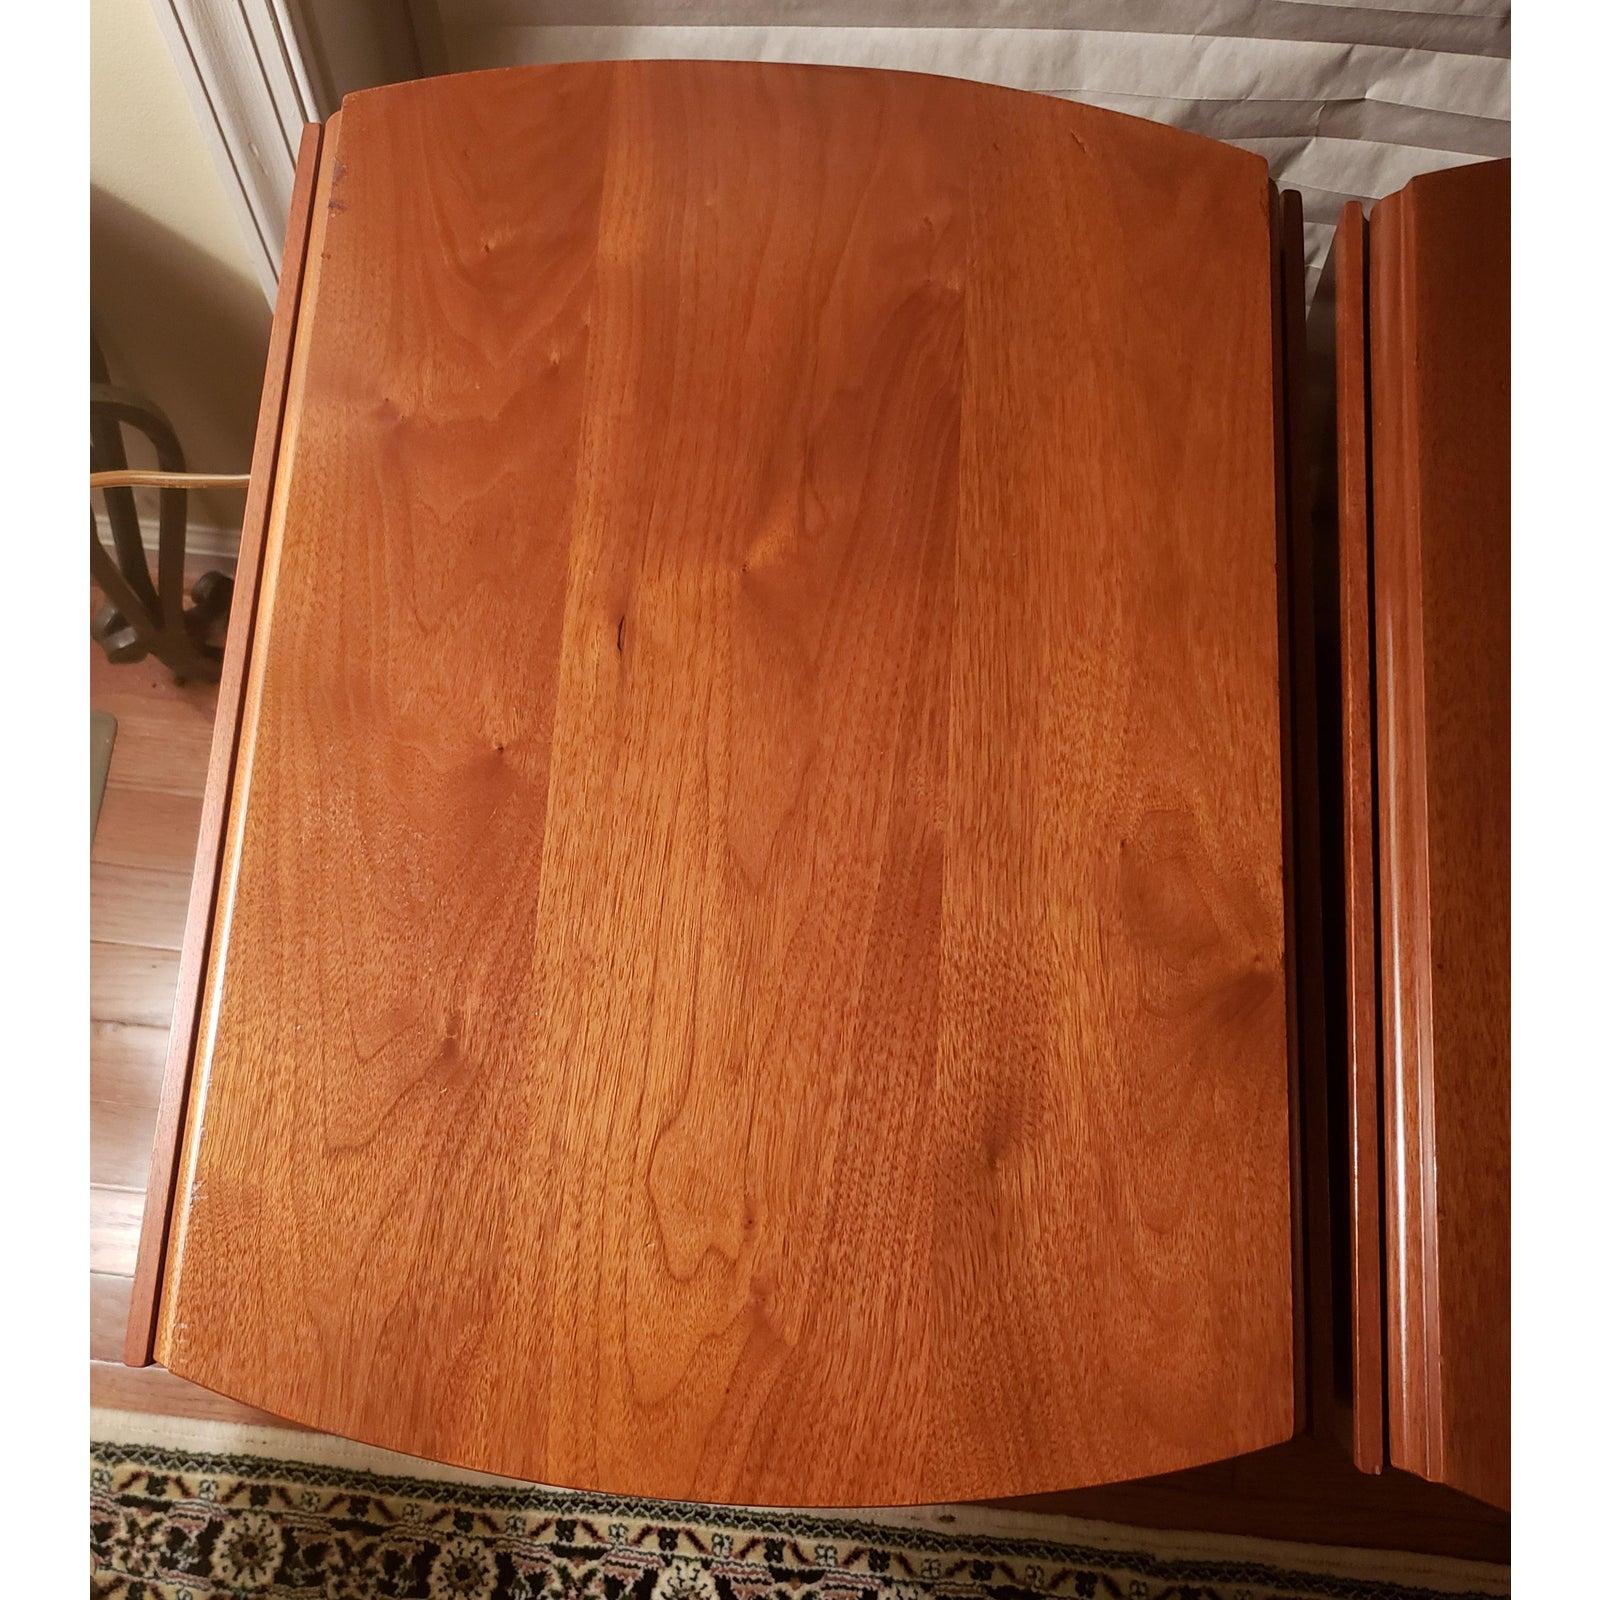 1970s Suters Hepplewhite Pembroke Drop-Leaves Oval Cherry Side Tables In Good Condition For Sale In Germantown, MD